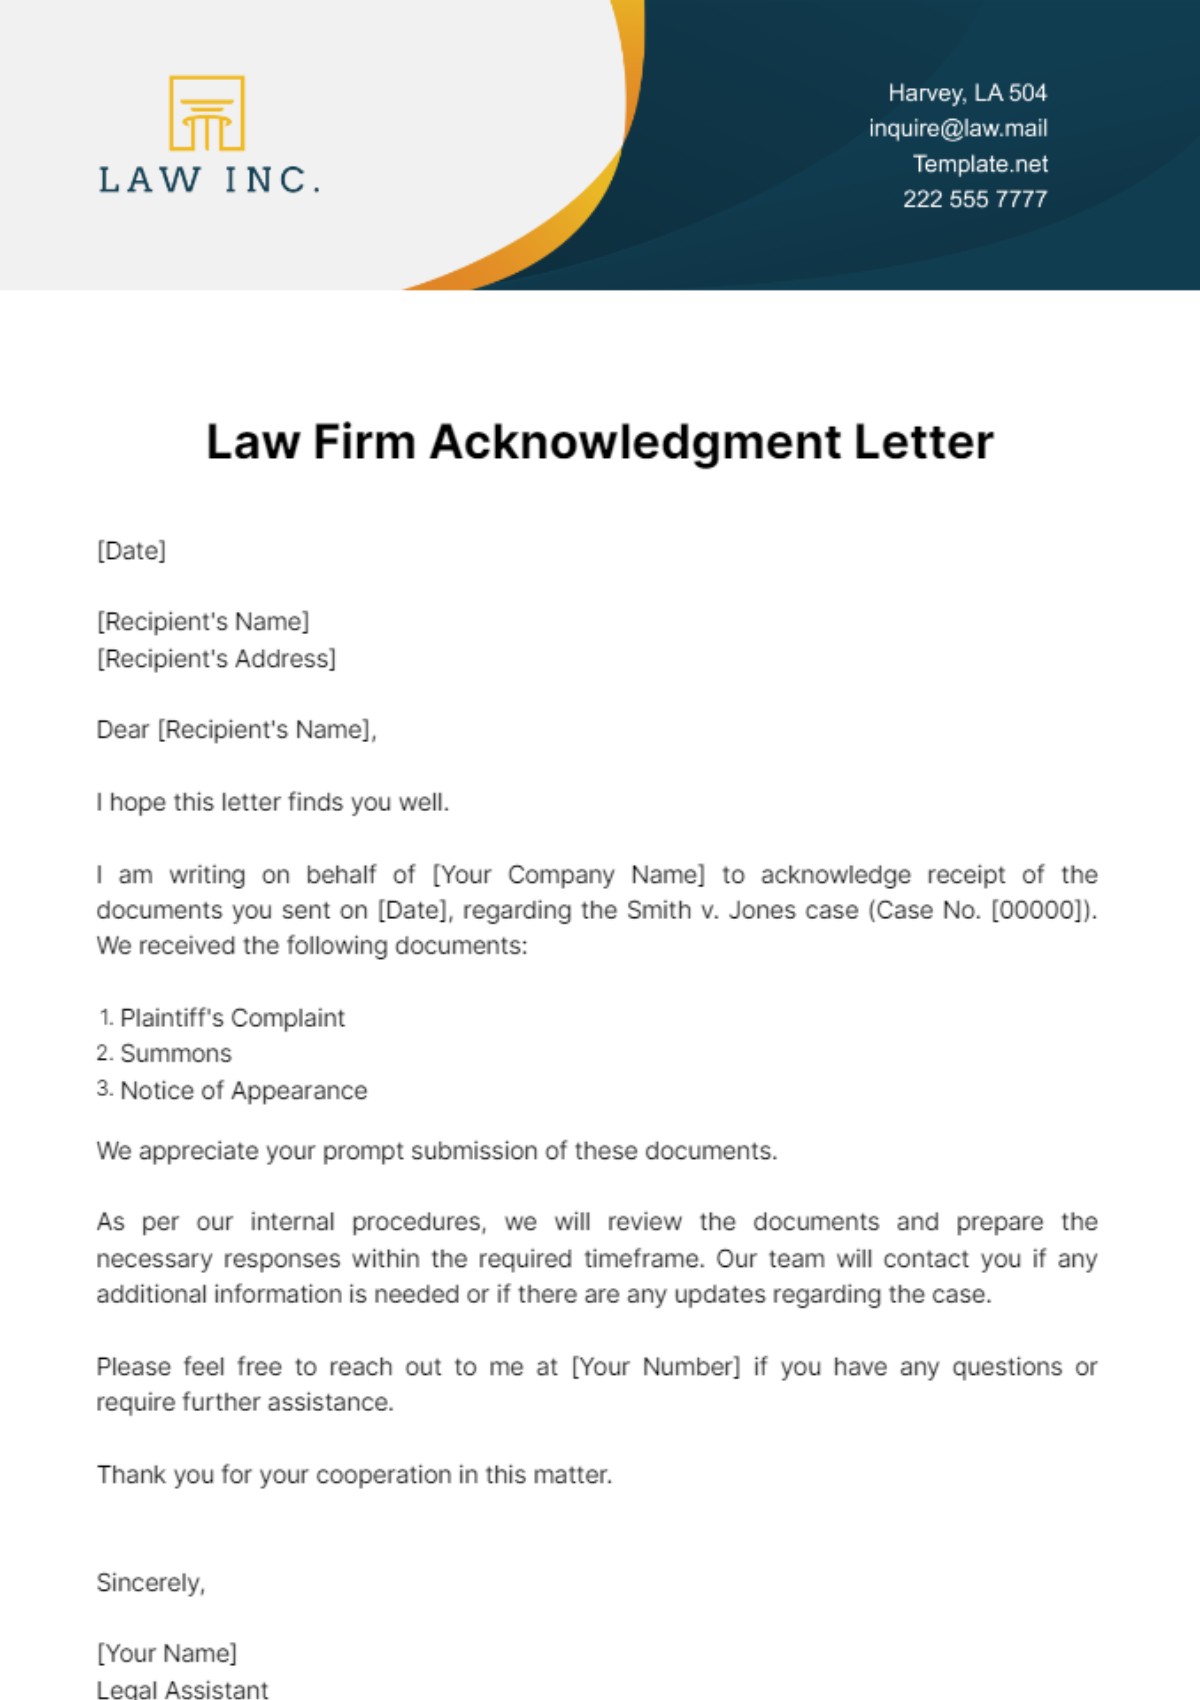 Law Firm Acknowledgment Letter Template